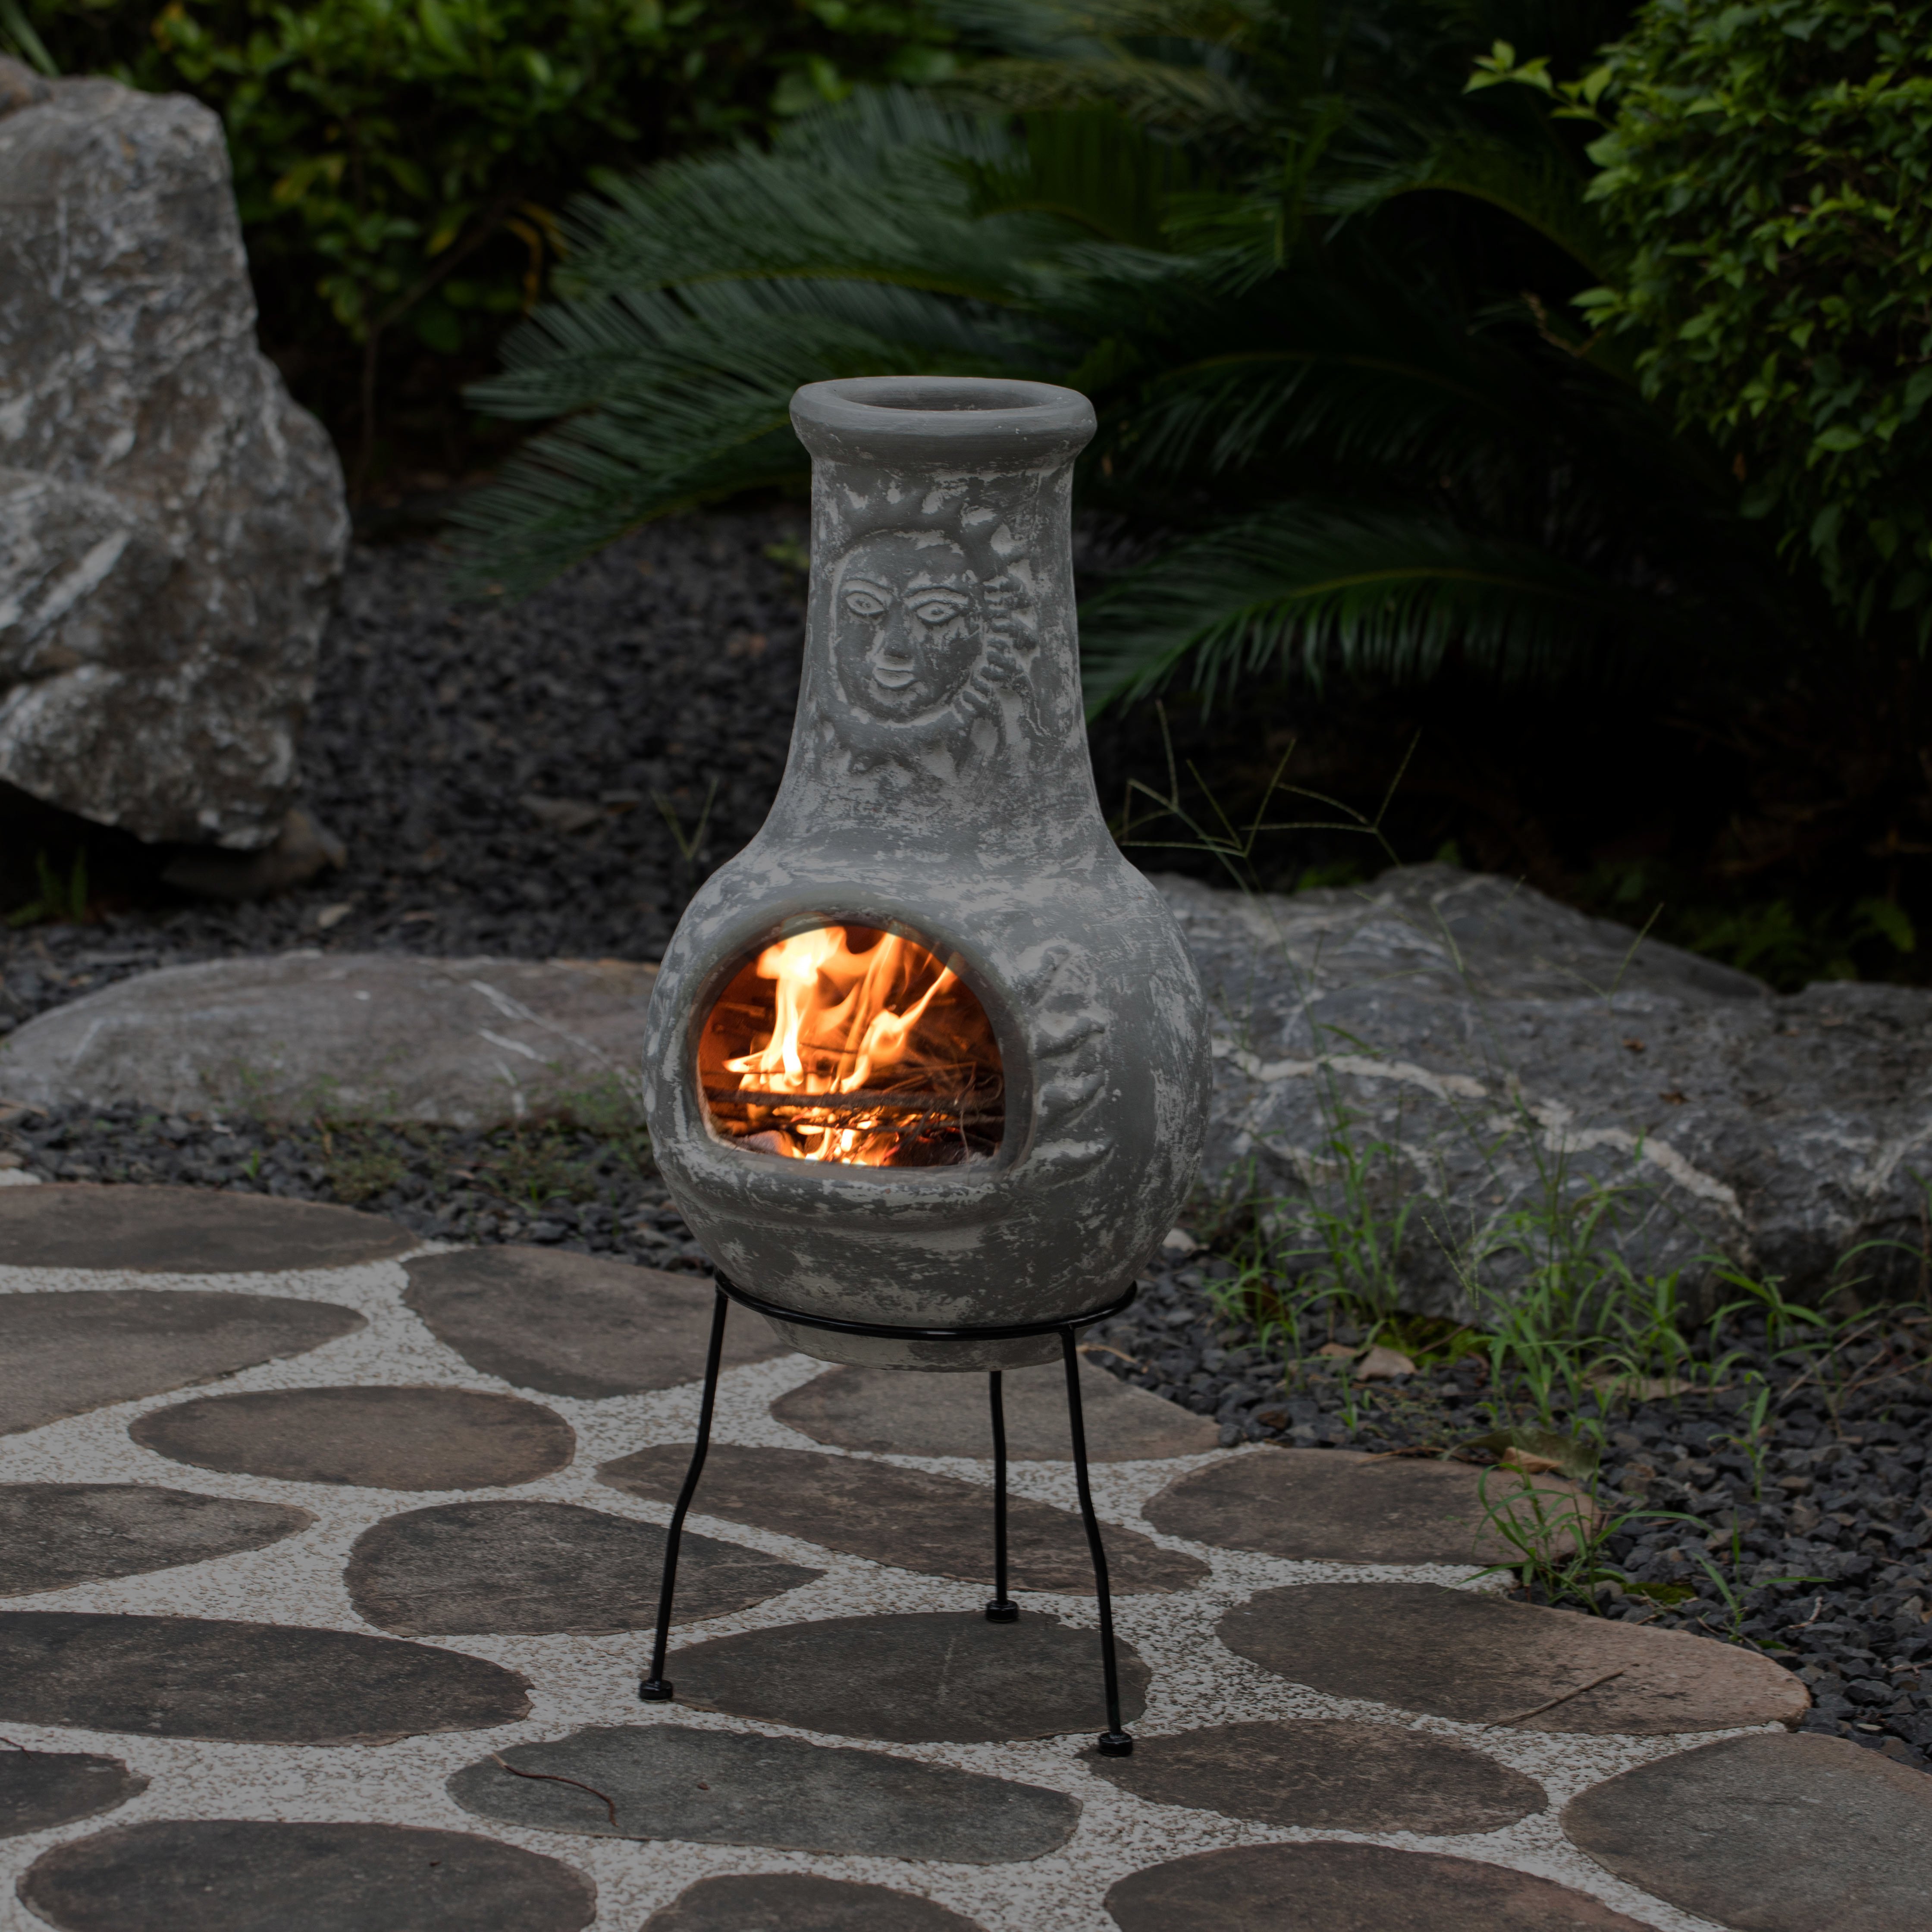 Outdoor Clay Chiminea Fireplace Sun Design Wood Burning Fire Pit With Sturdy Metal Stand, Barbecue, Cocktail Party, Cozy Nights Fire Pit - G